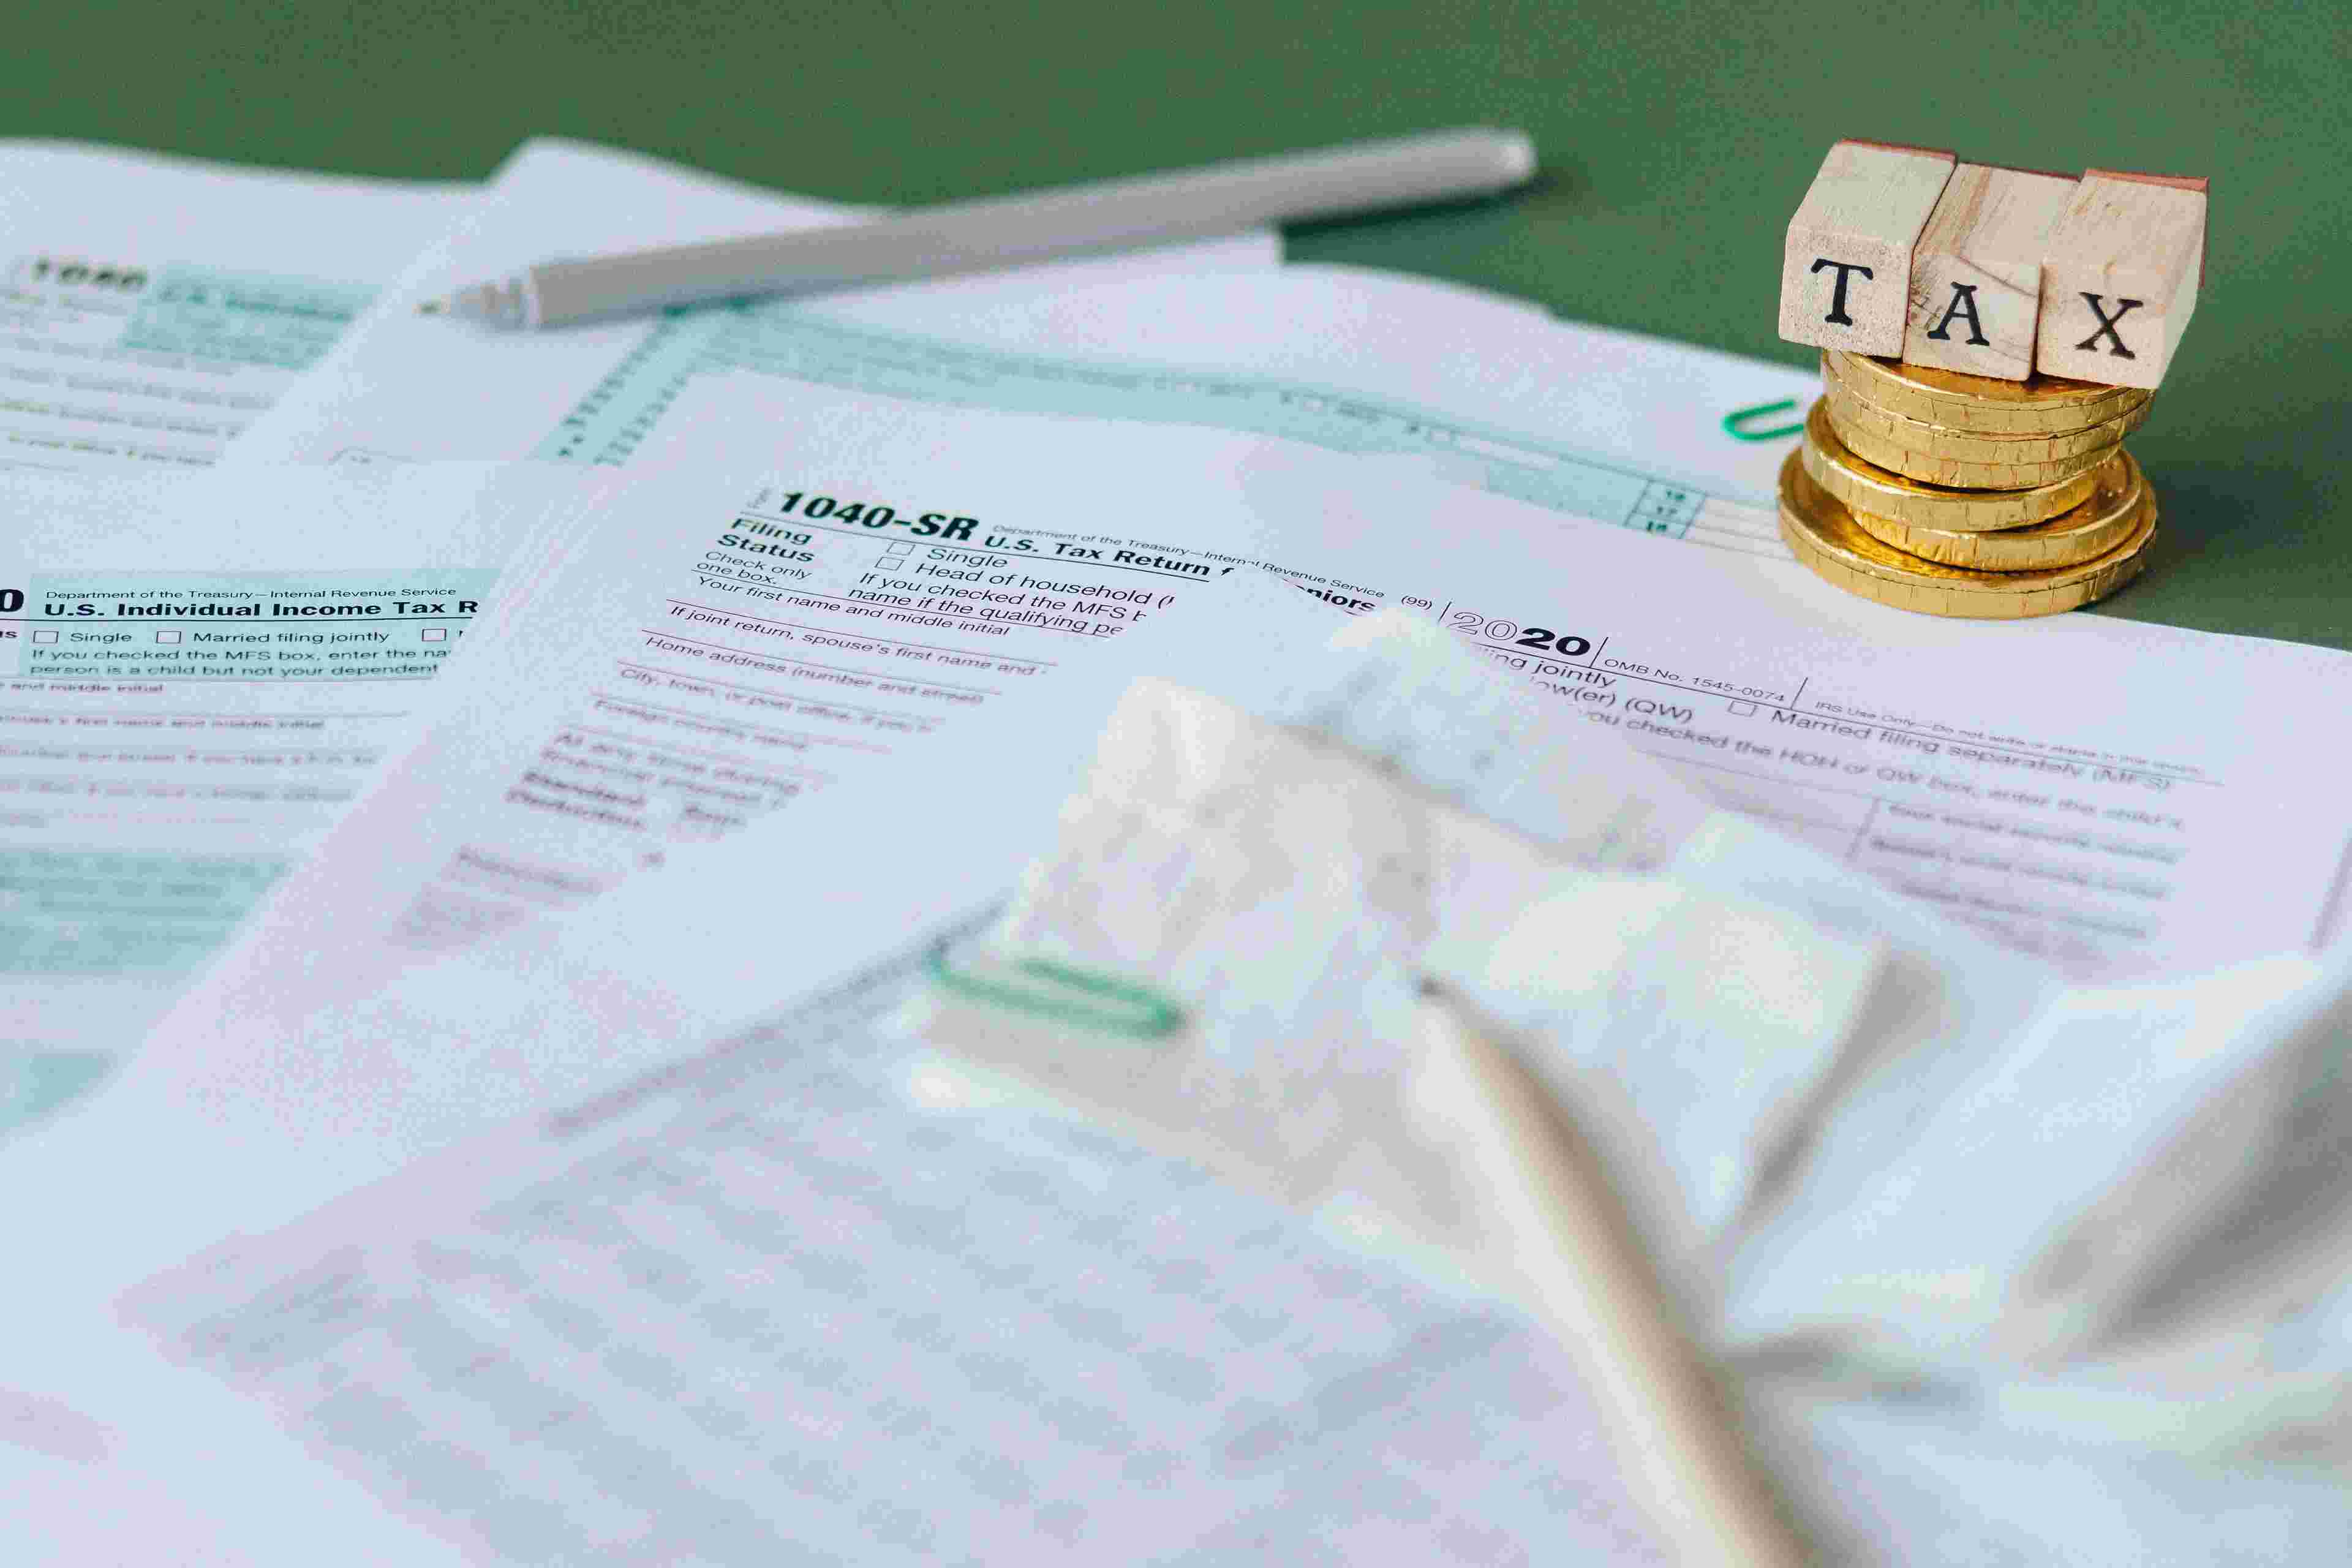 Incorporation Tax Forms